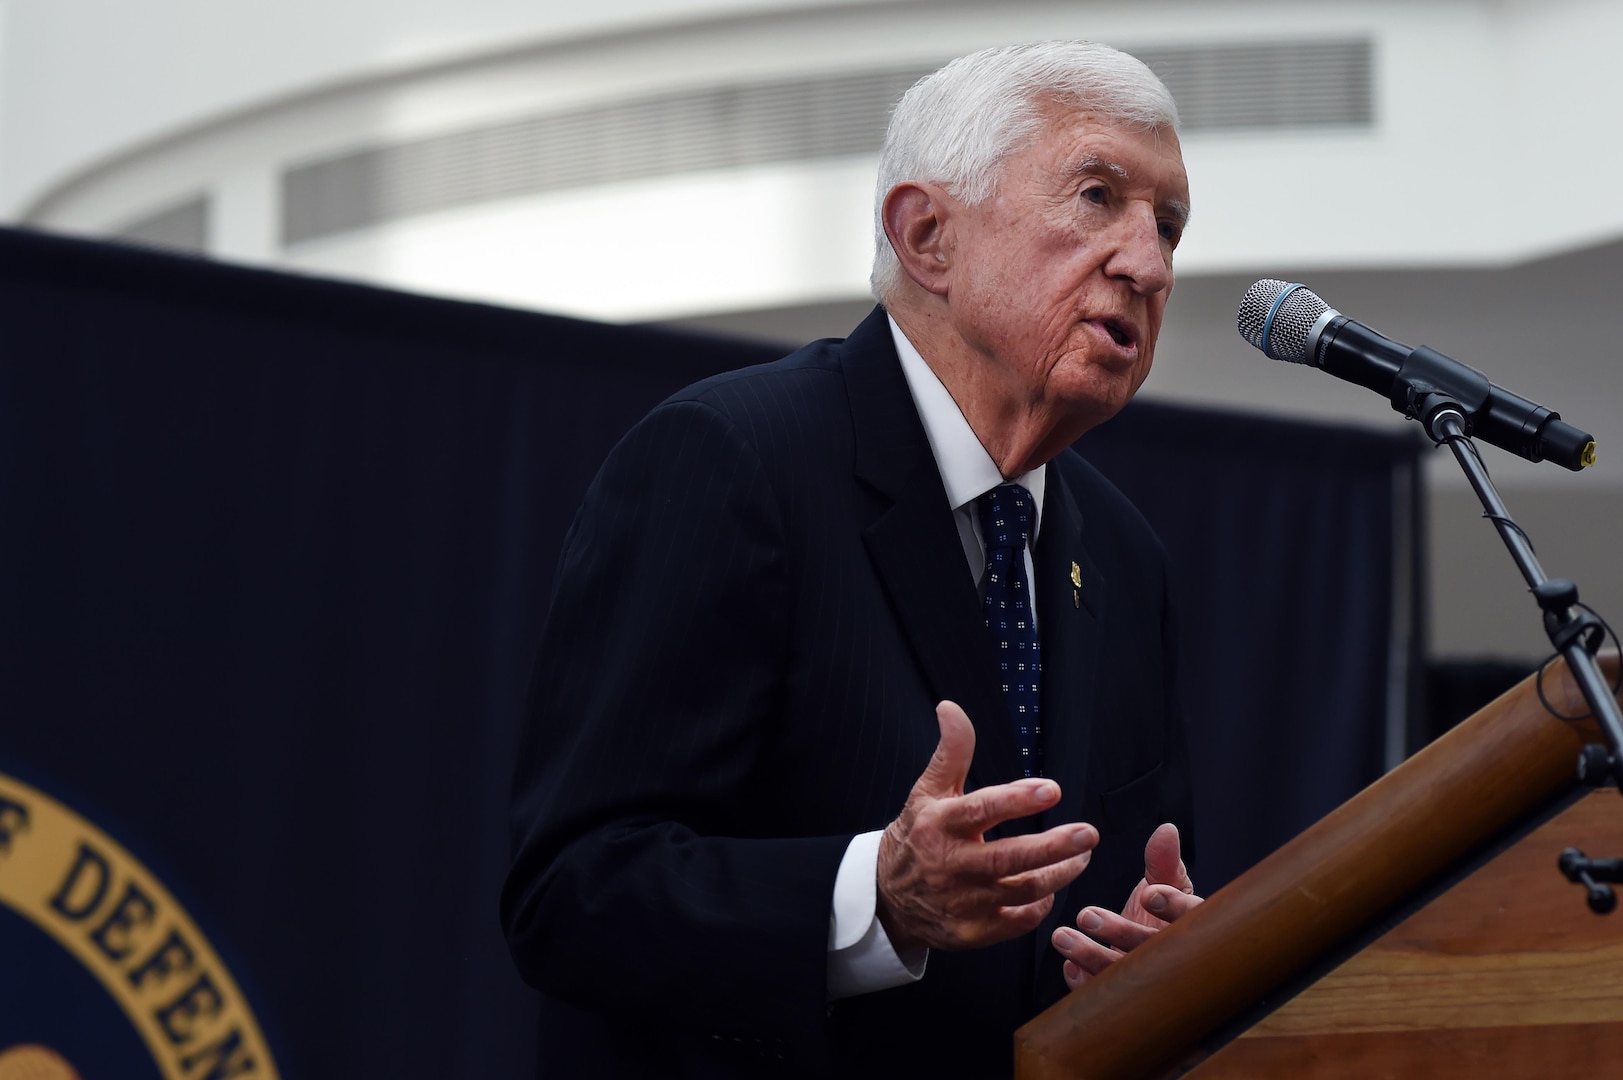 Retired Army Lt. Gen. Herbert R. Temple Jr. addresses those in attendance during a ceremony renaming the Army National Guard headquarters building in his honor in Arlington, Virginia, Feb. 22, 2017. Temple, 88, who enlisted in the California Army National Guard in 1947, served as the chief of the National Guard Bureau from 1986 to 1990 and was instrumental in both shaping the National Guard of today and was the driving force behind the building that now bears his name. 